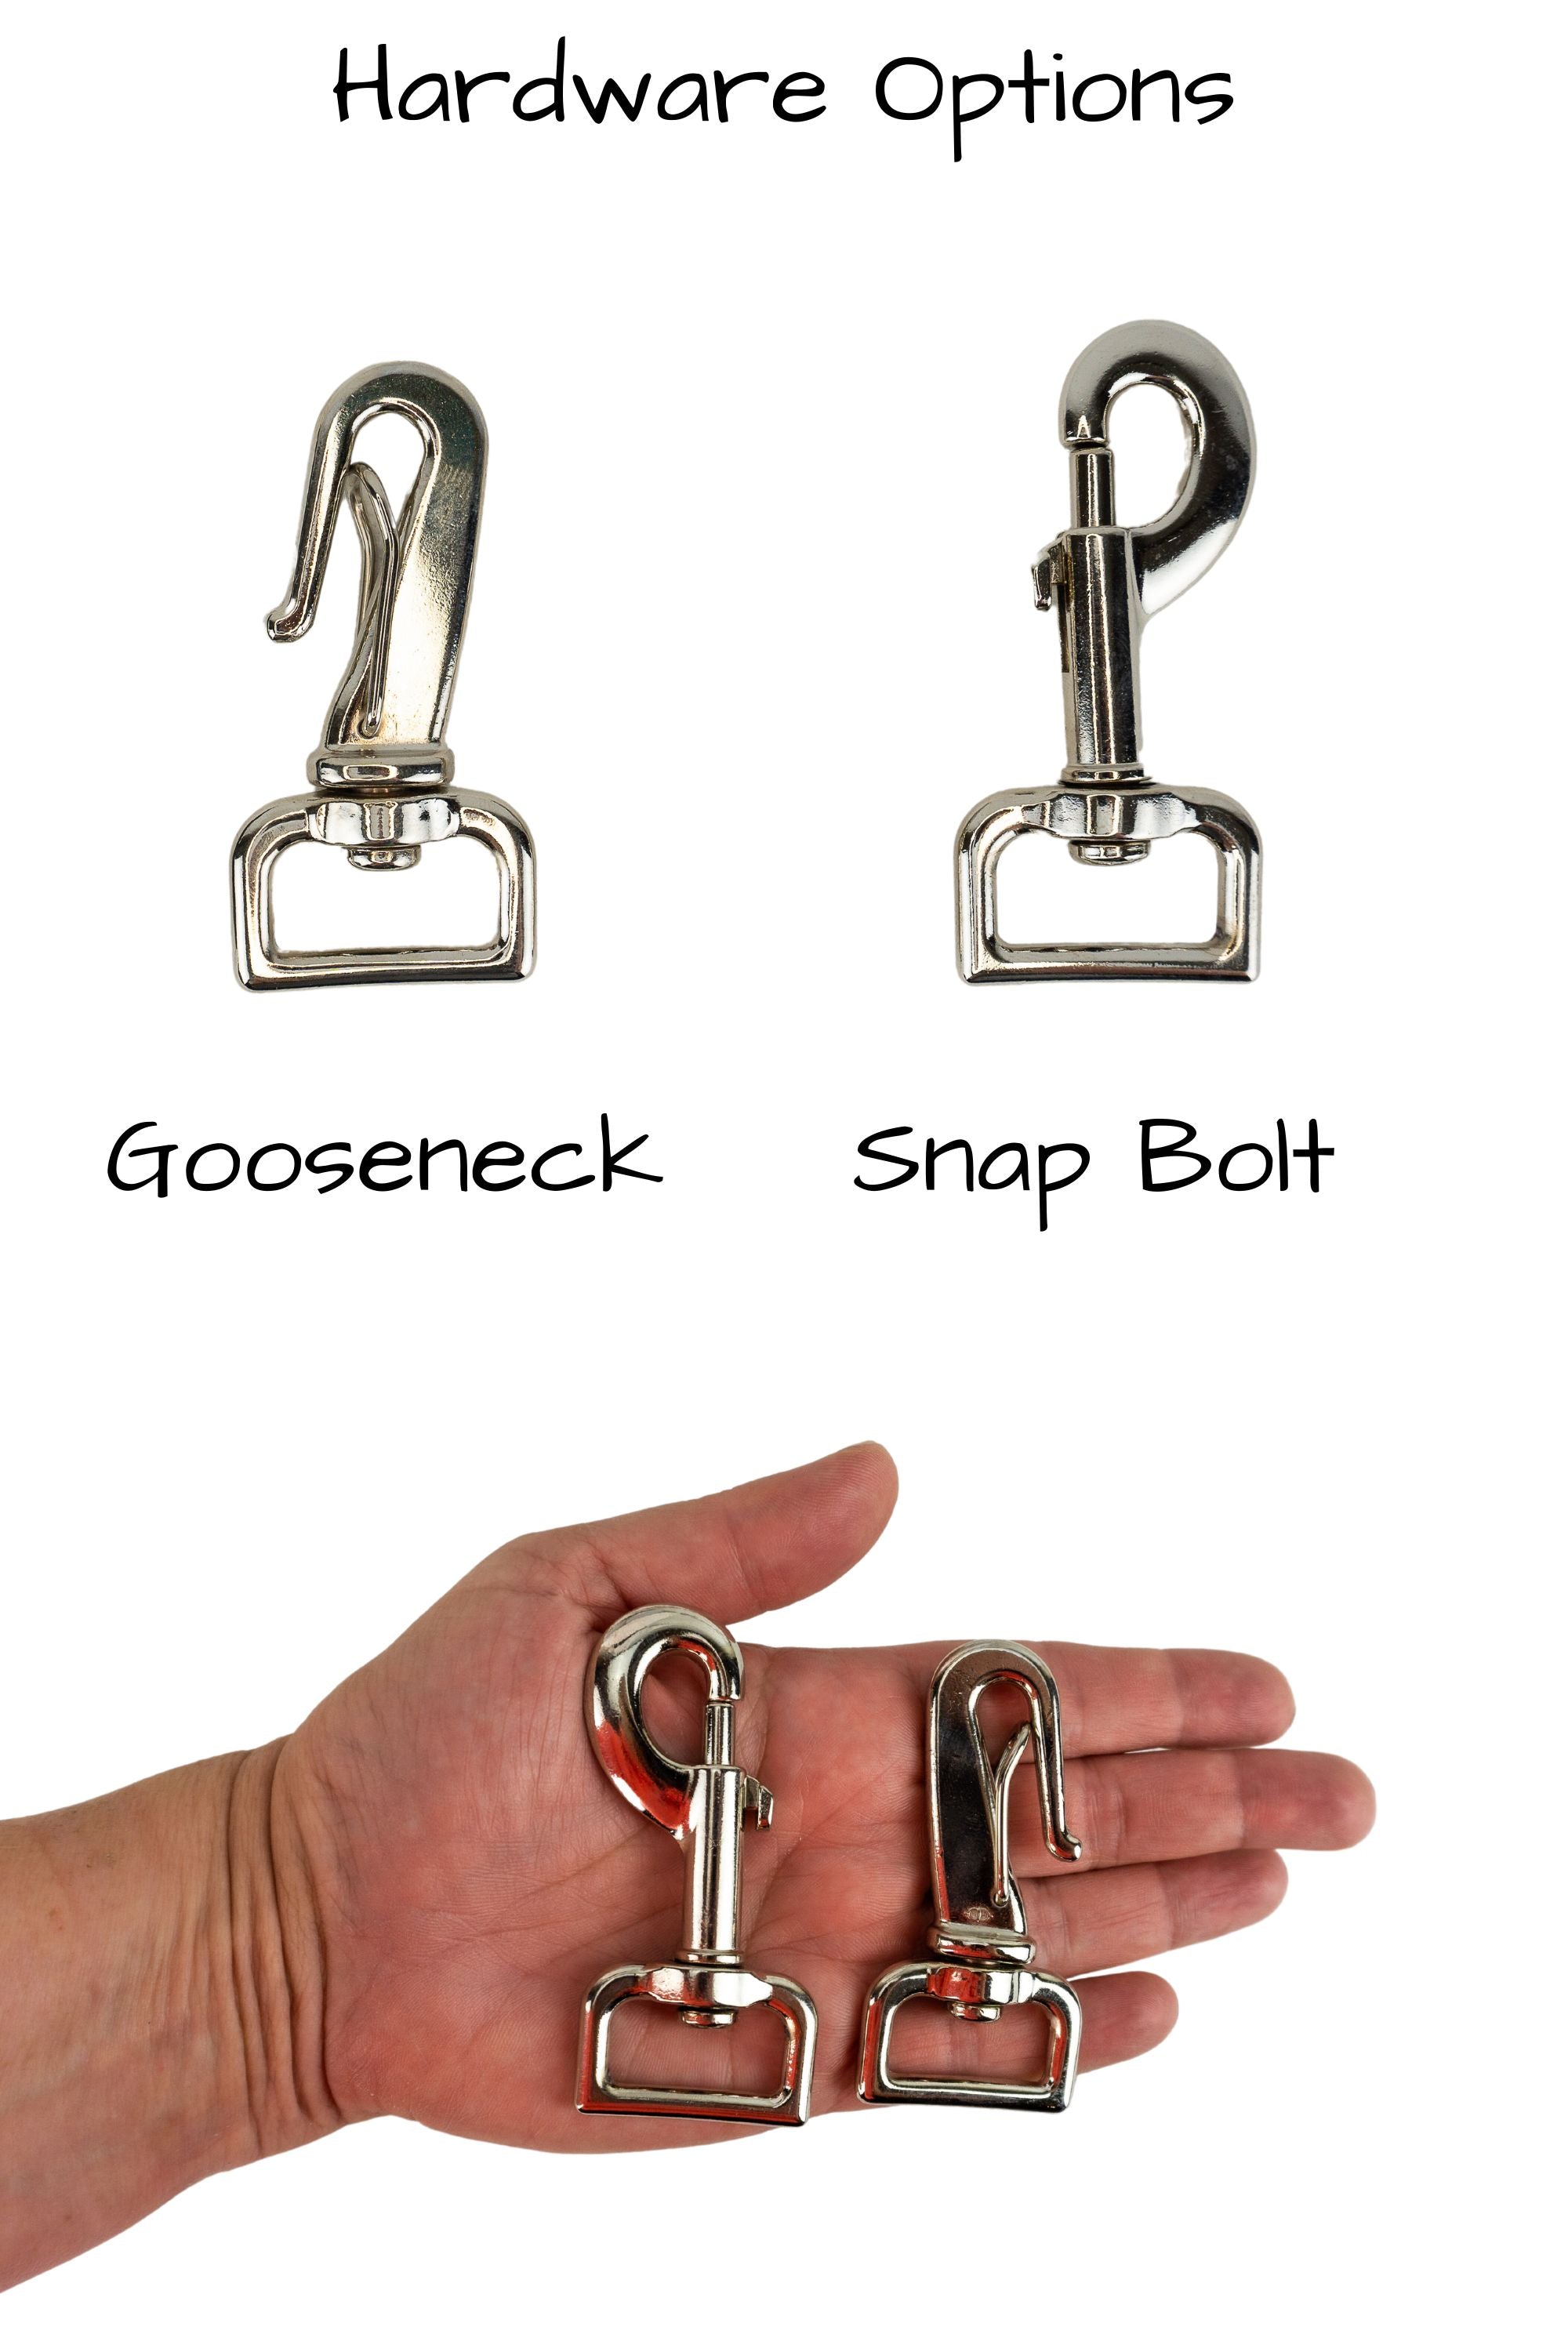 Two hardware options are provided for the training tabs, the gooseneck clip and the snap bolt are shown in the palm of an adult hand for scale.